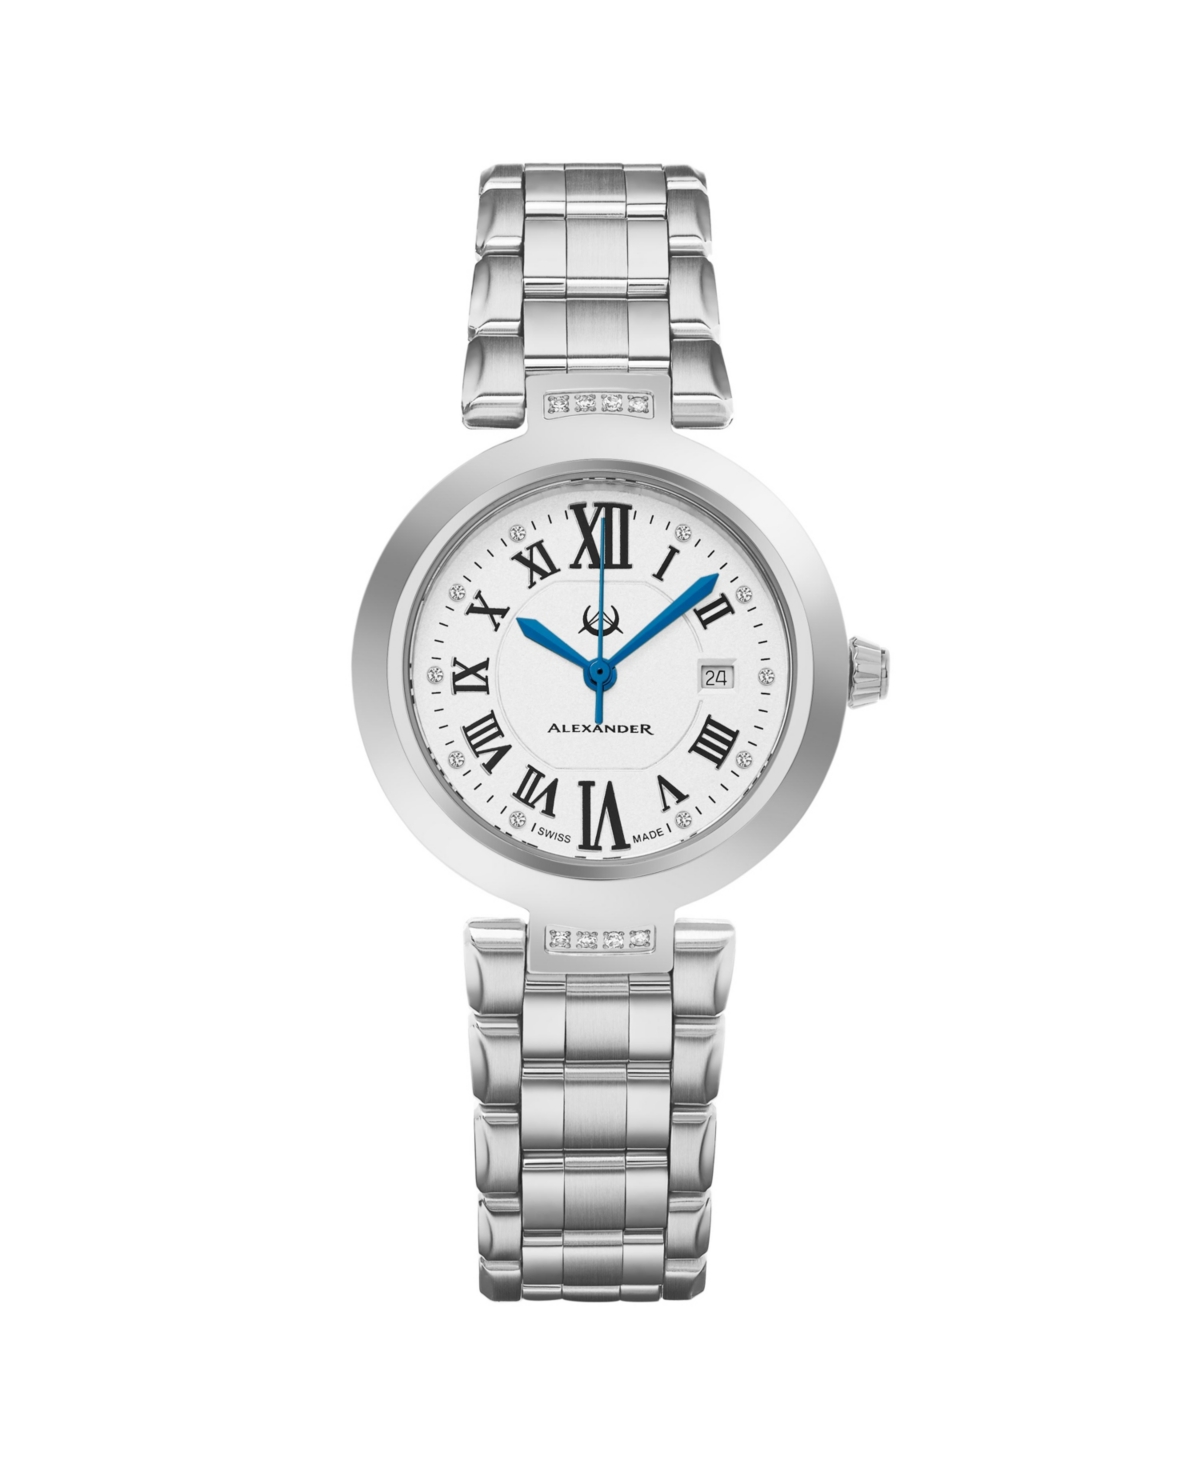 Ladies Quartz Date Watch with Stainless Steel Case on Stainless Steel Bracelet, Silver Diamond Dial - Silver-tone